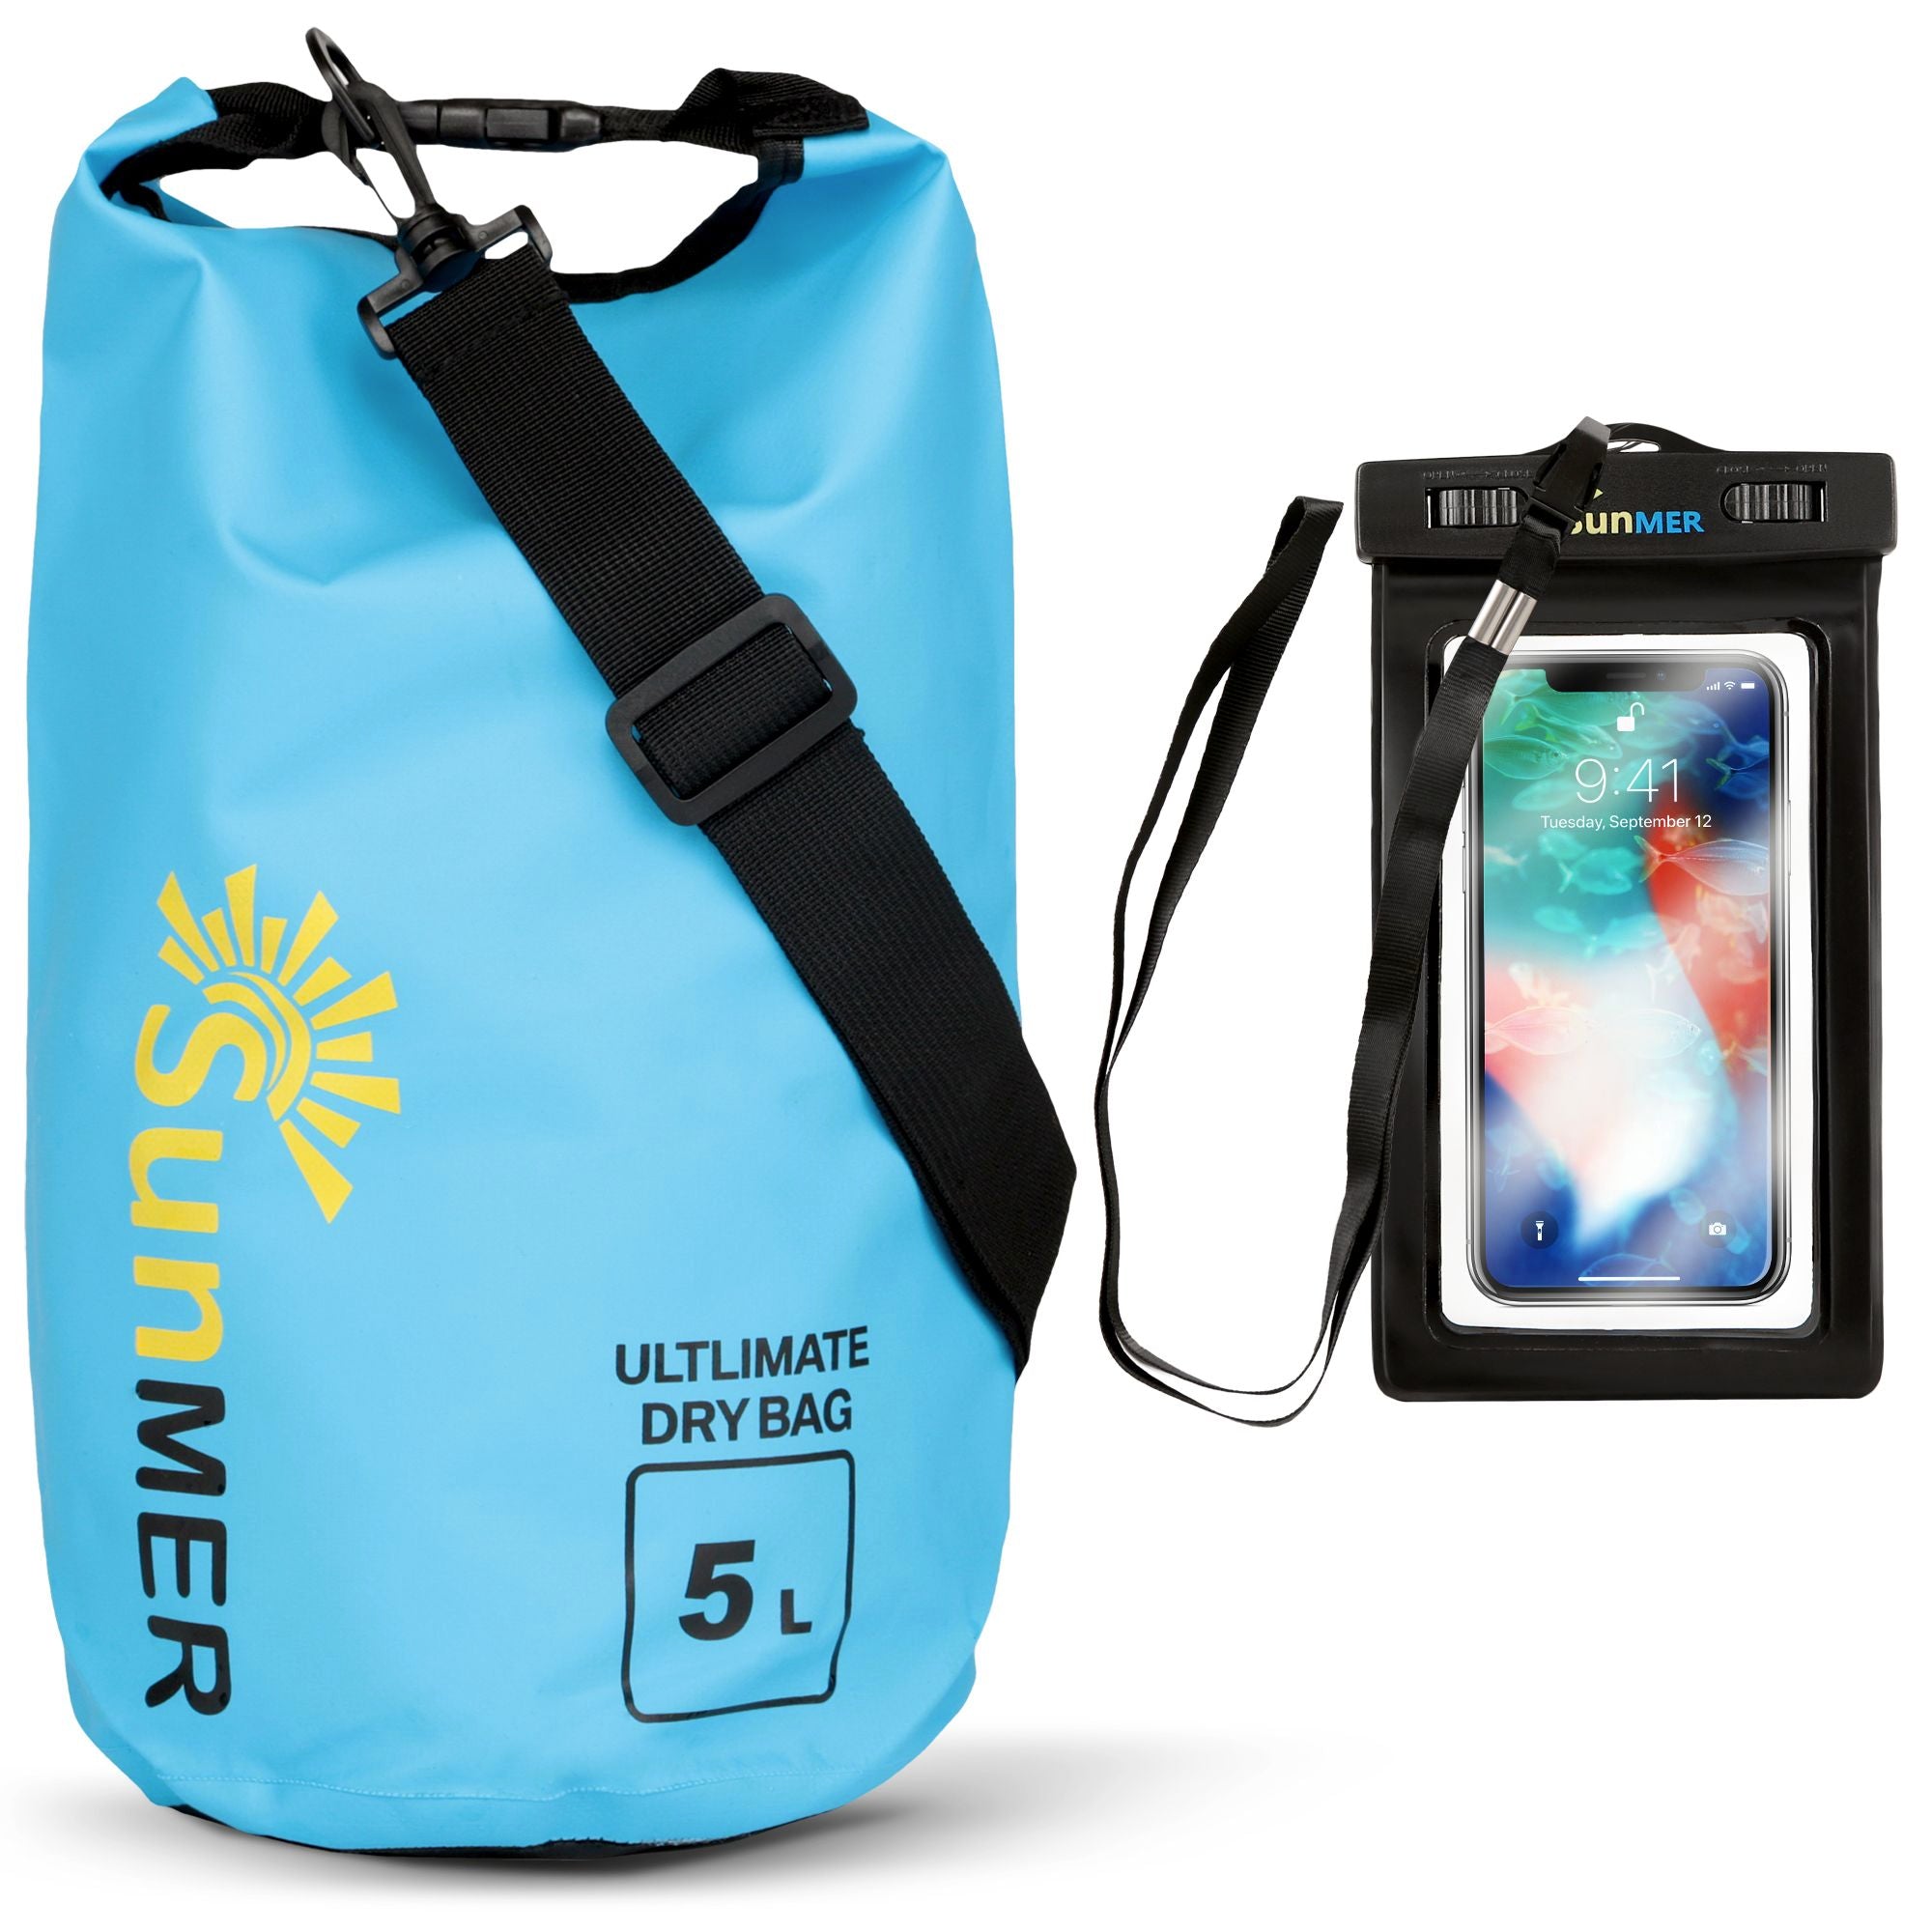 5L Dry Bag With Waterproof Phone Case - Blue